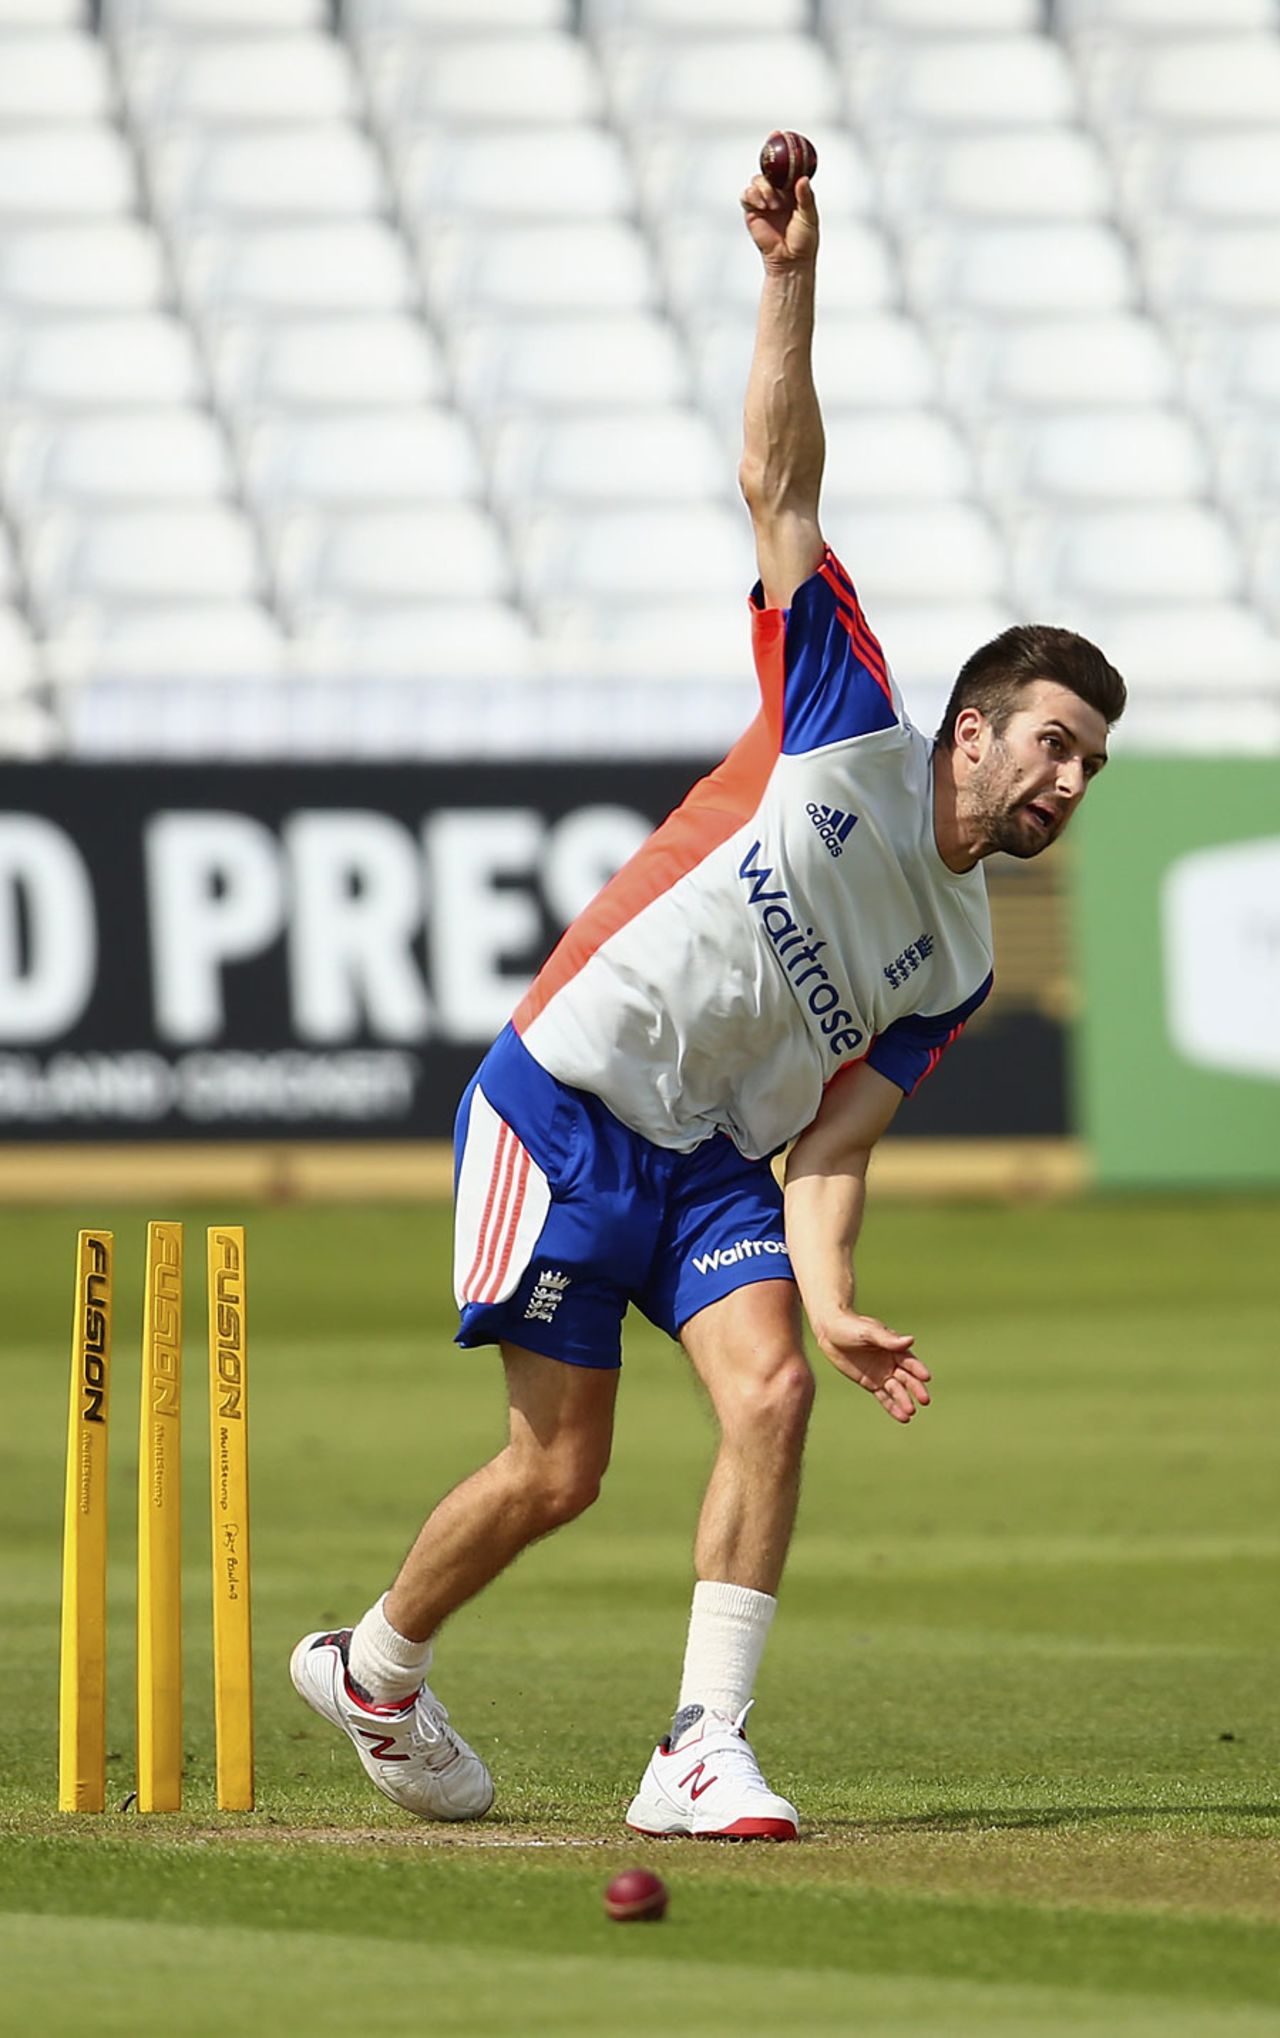 Mark Wood tests his troublesome ankle, Trent Bridge, August 3, 2015